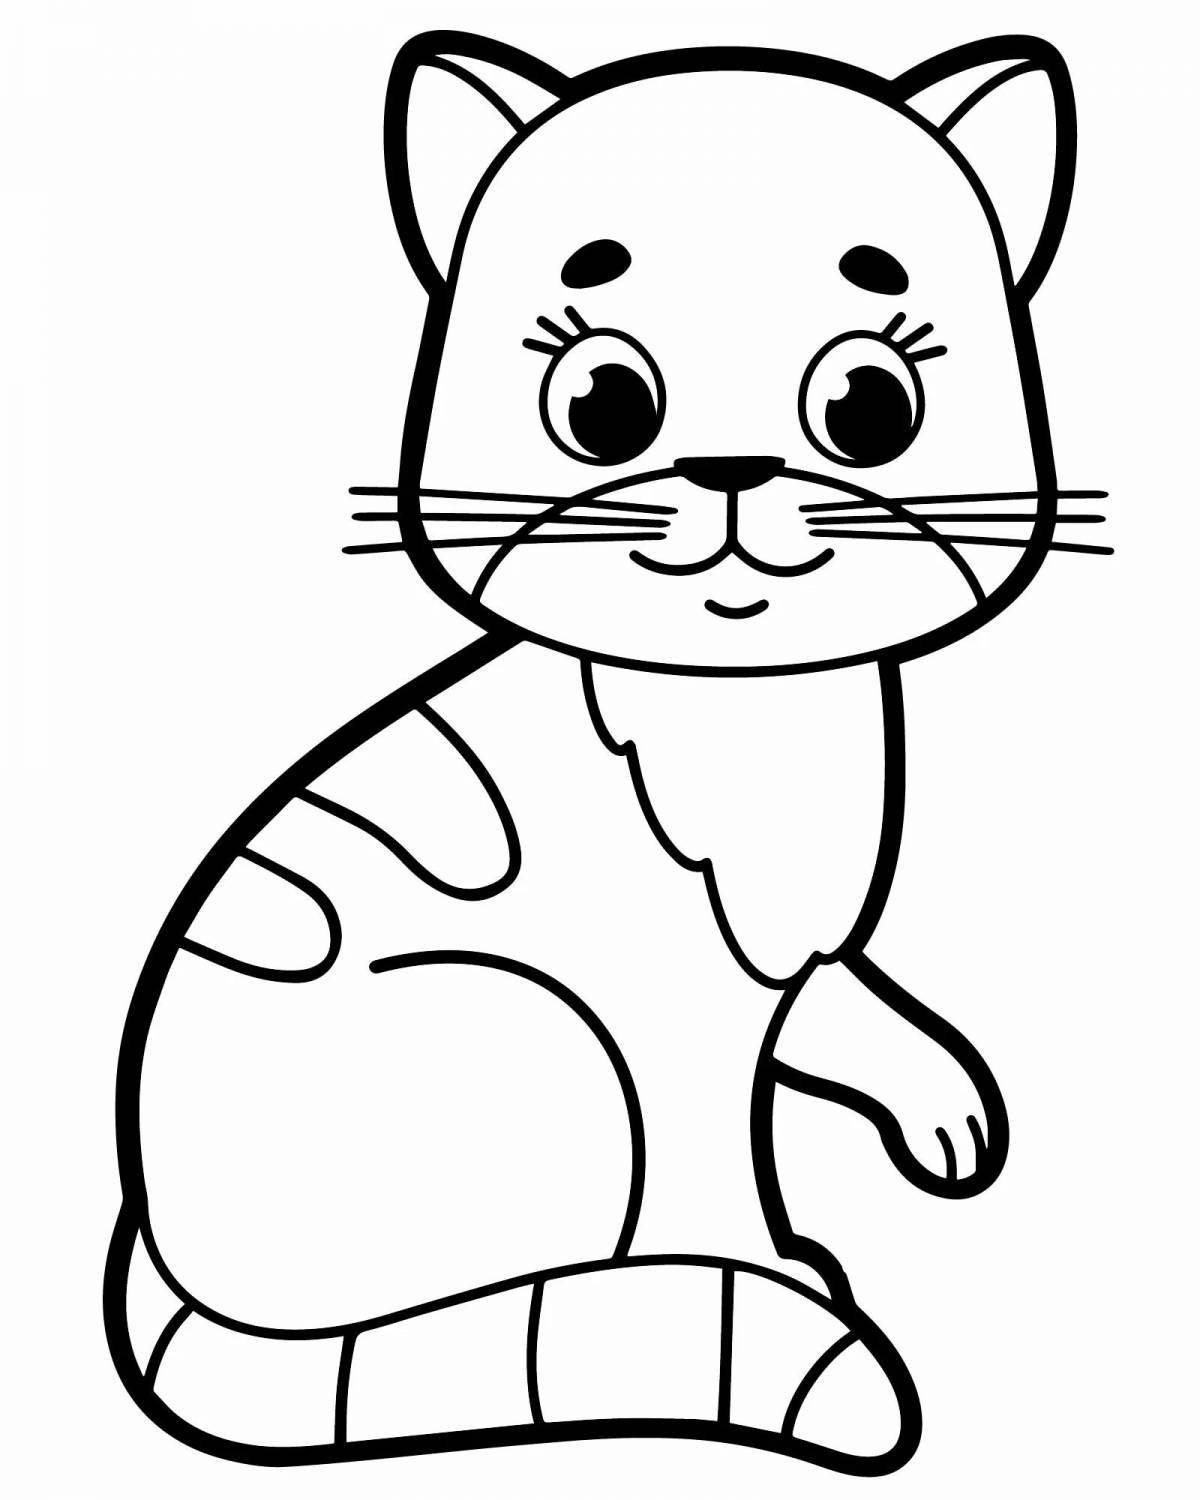 Kitty magic coloring book for kids